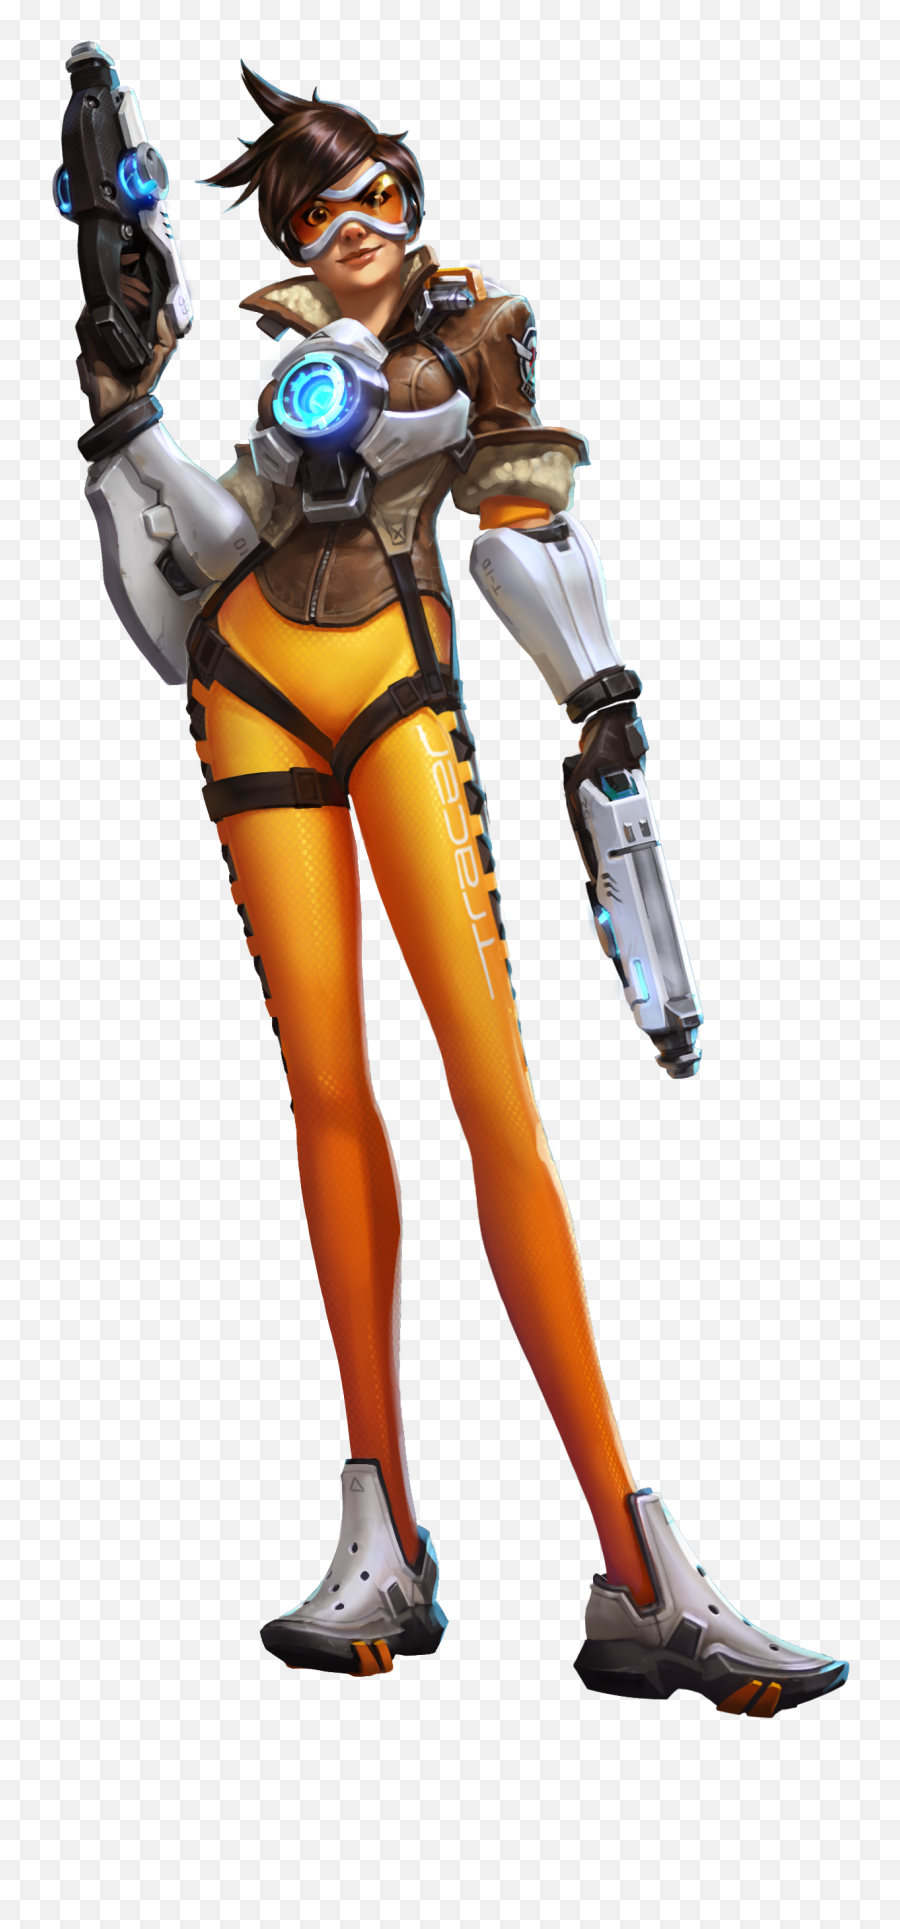 Tracer From Heroes Of The Storm - Overwatch Tracer Png,Overwatch Tracer Png